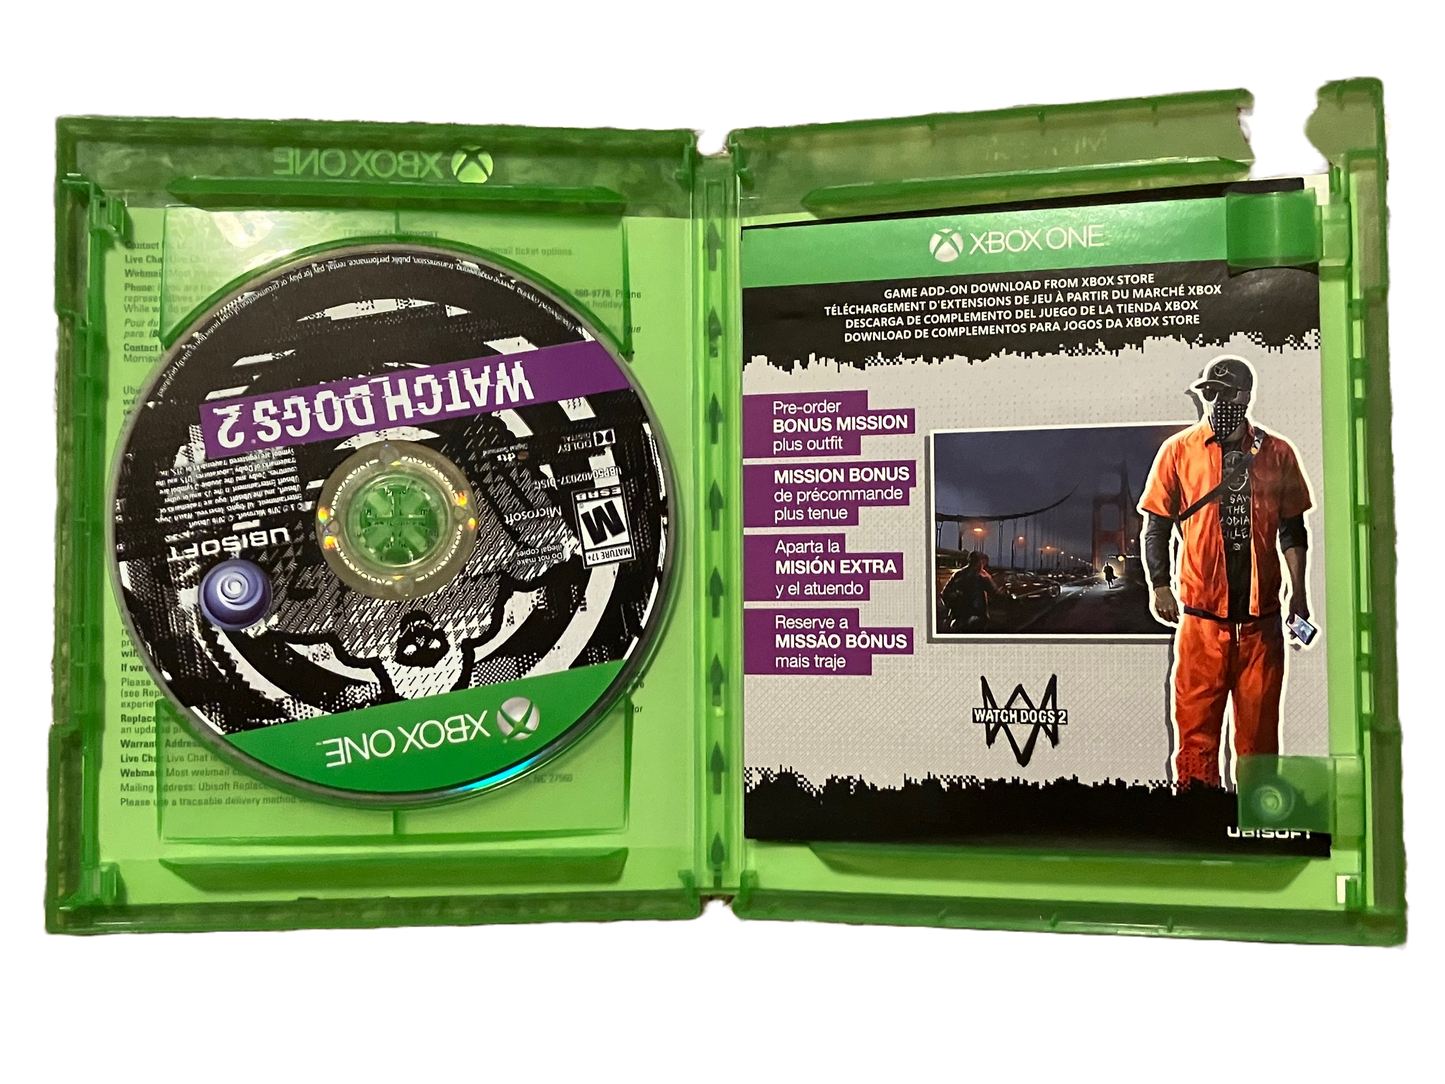 Watch Dogs 2 Xbox One Game